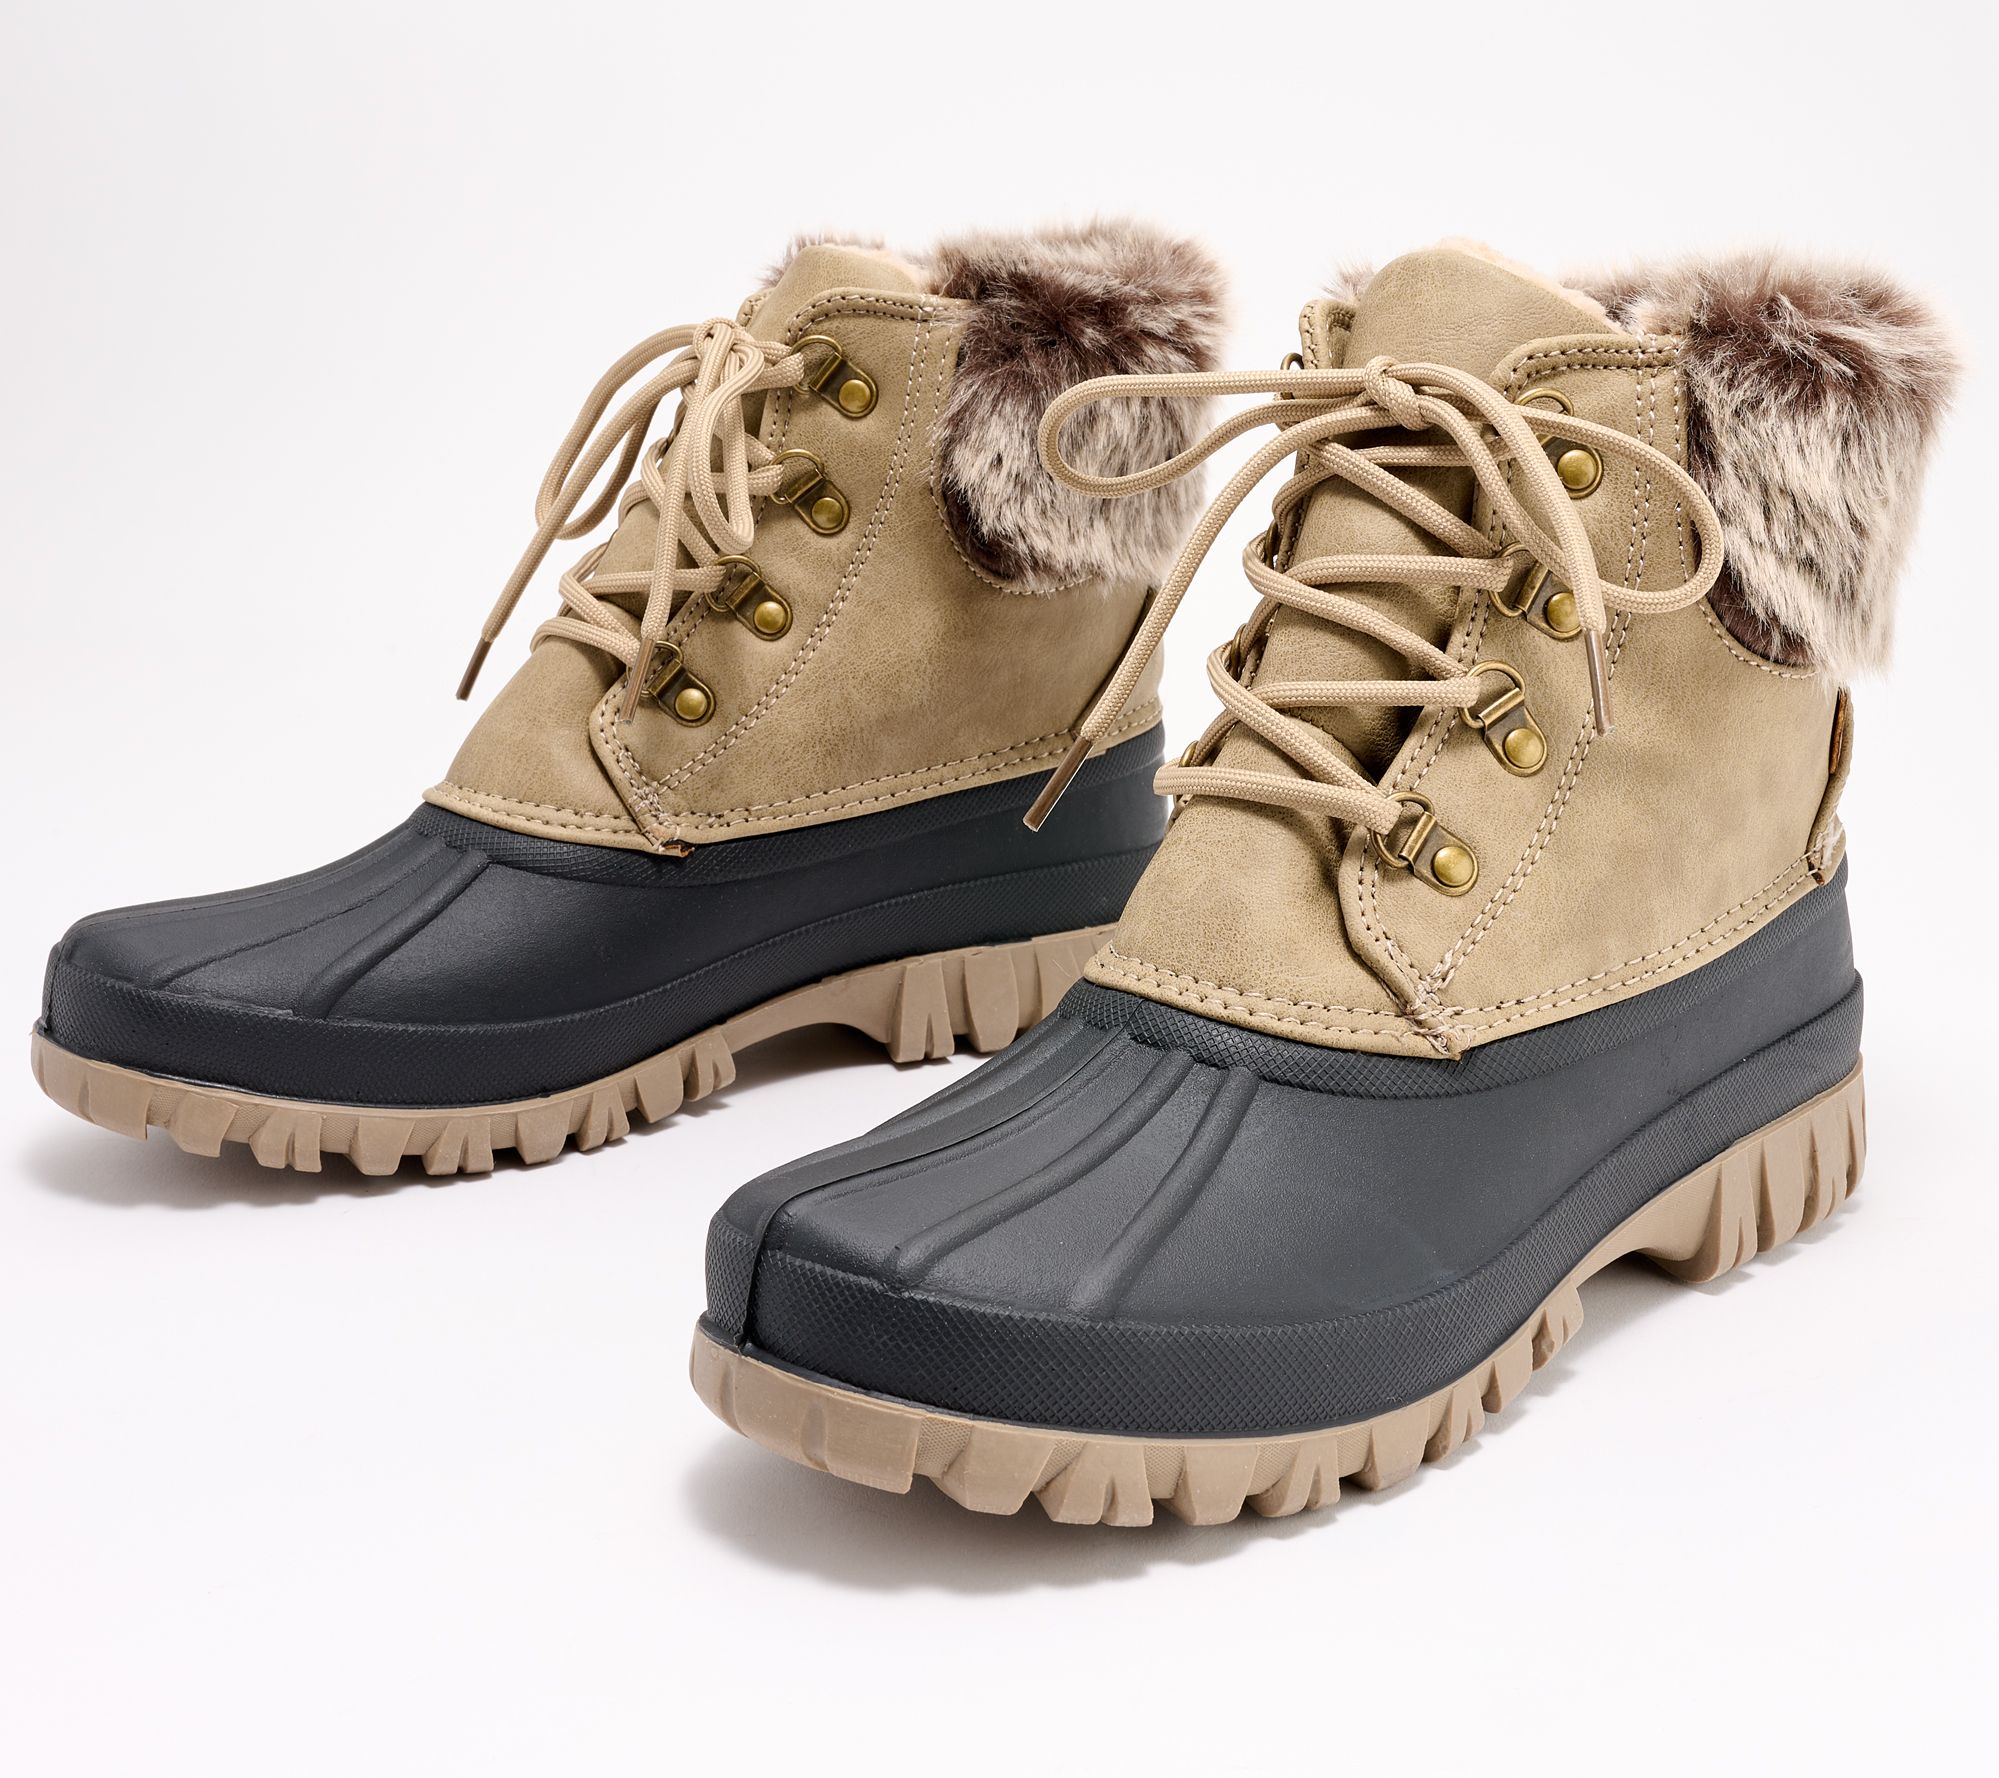 Lamo Lined Lace-Up Winter Boots - Brielle